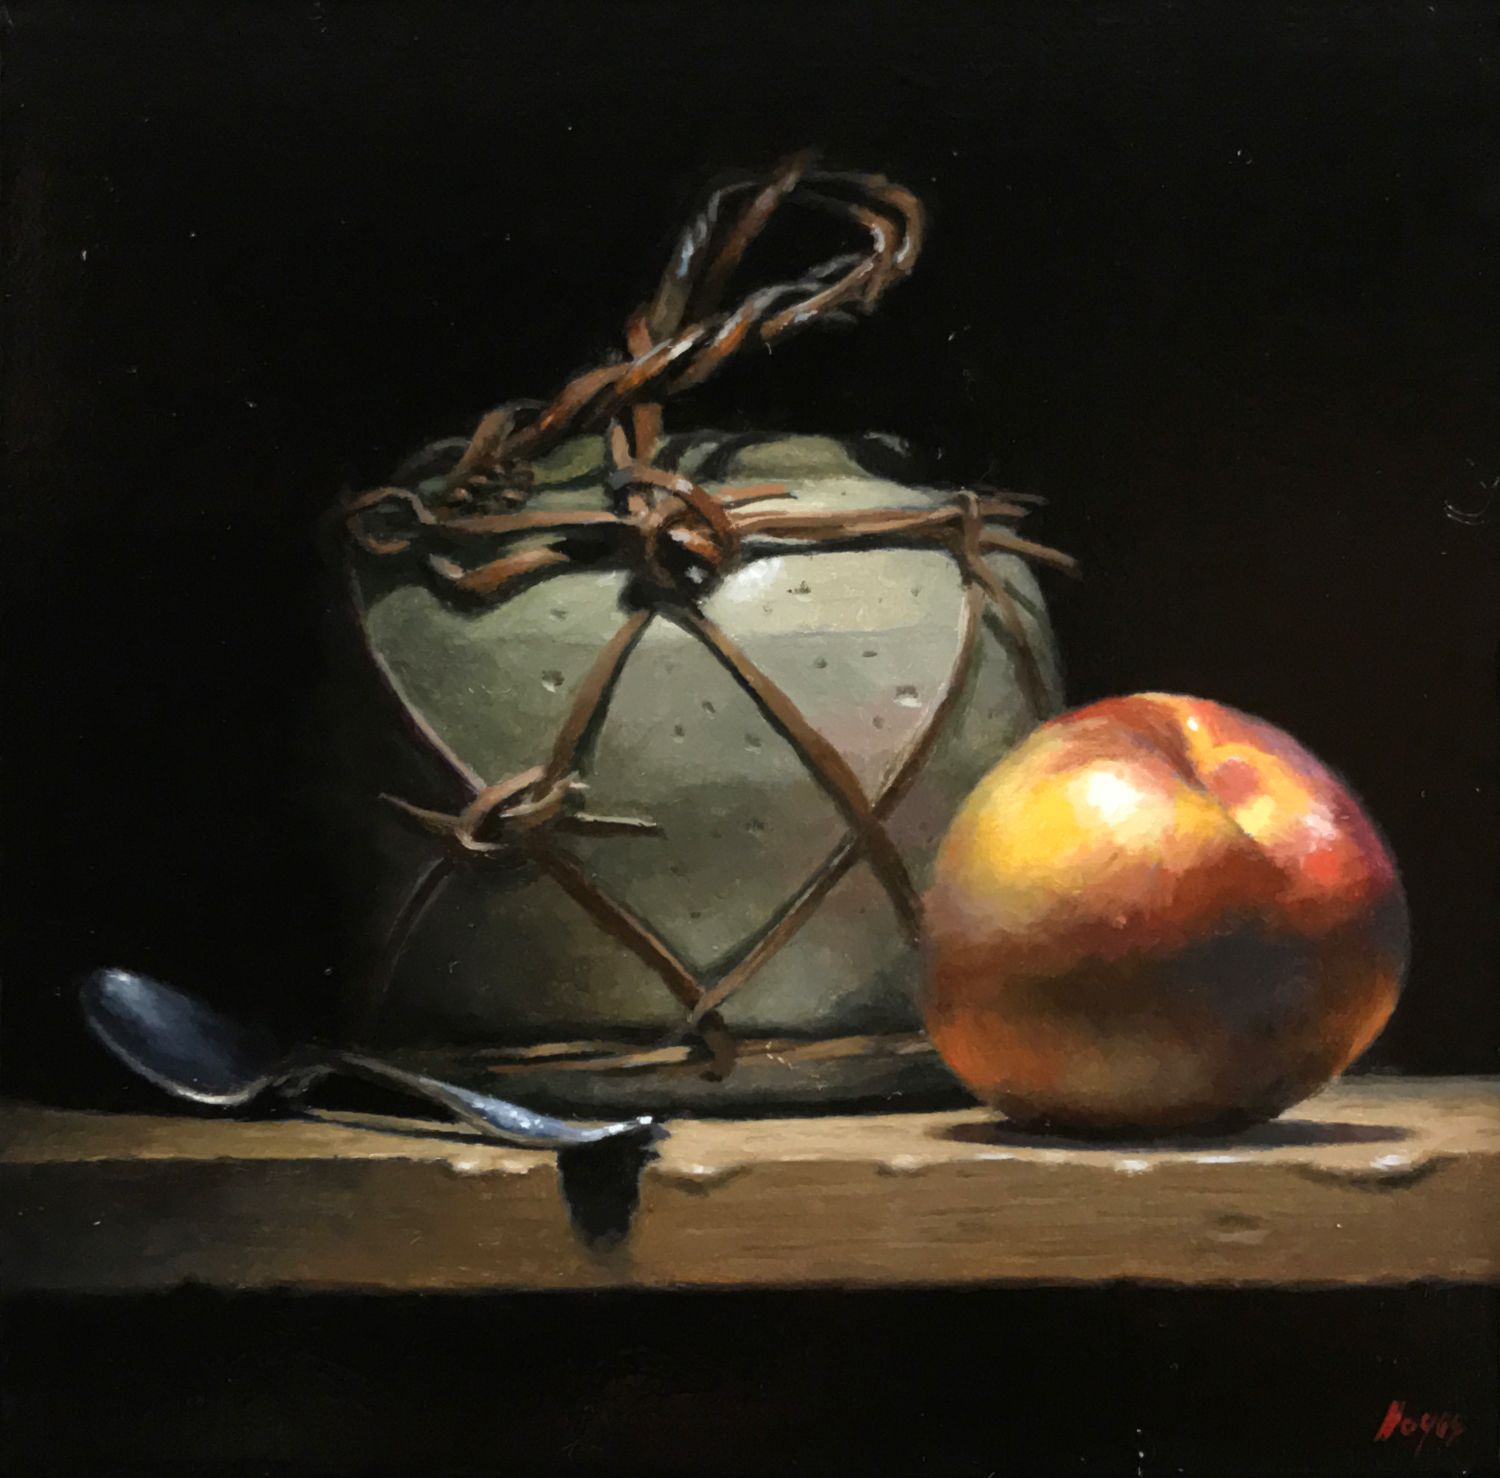 "Silver, Ginger Jar, Nectarine", oil on panel, 5x5 inches